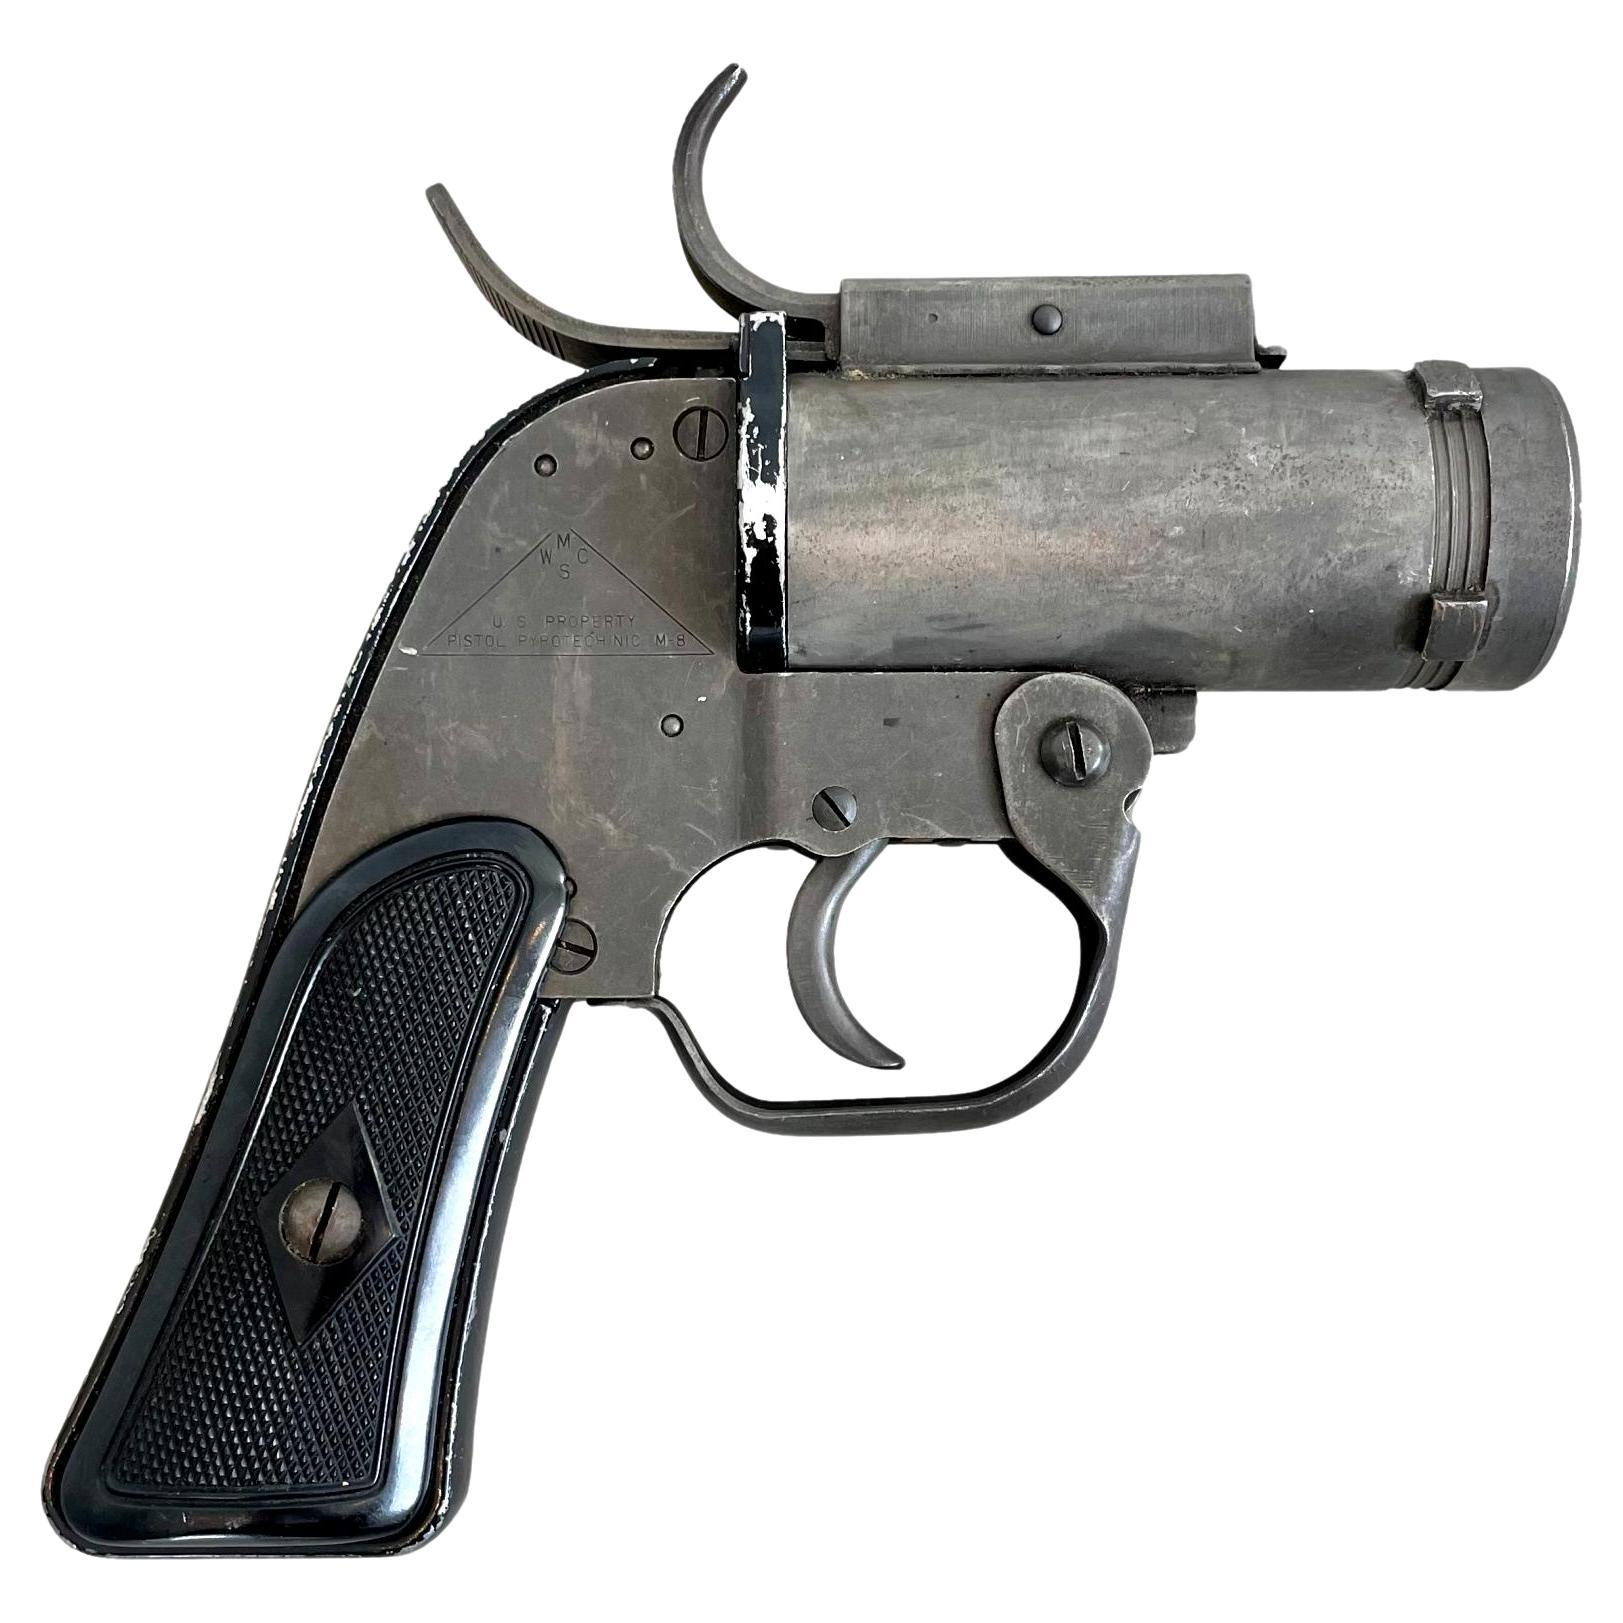 WWII AN-M8 Flare Gun, 1940s USA For Sale